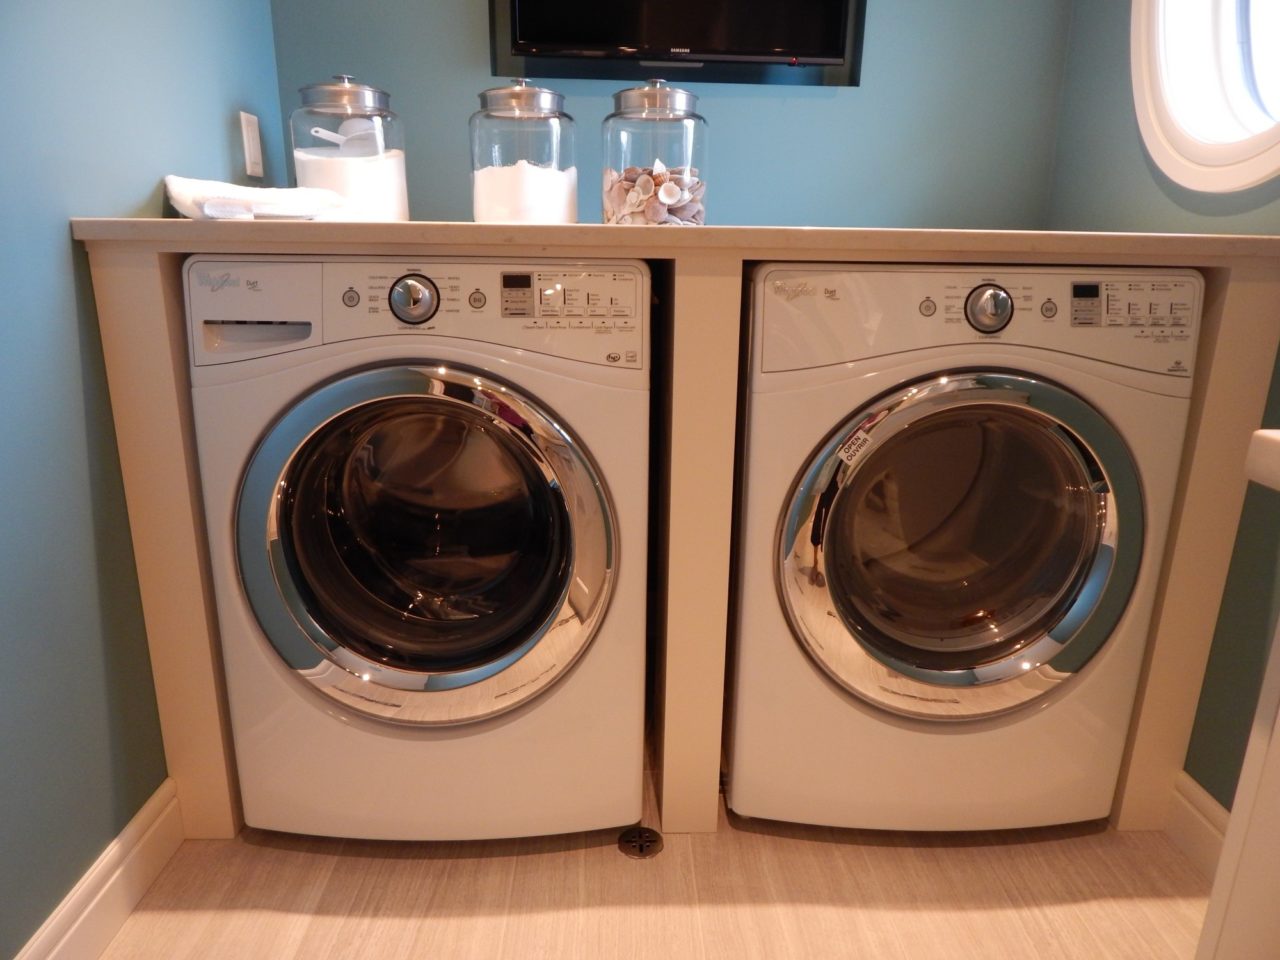 5 Reasons to Supply Your Tenants With a Reliable Washer and Dryer